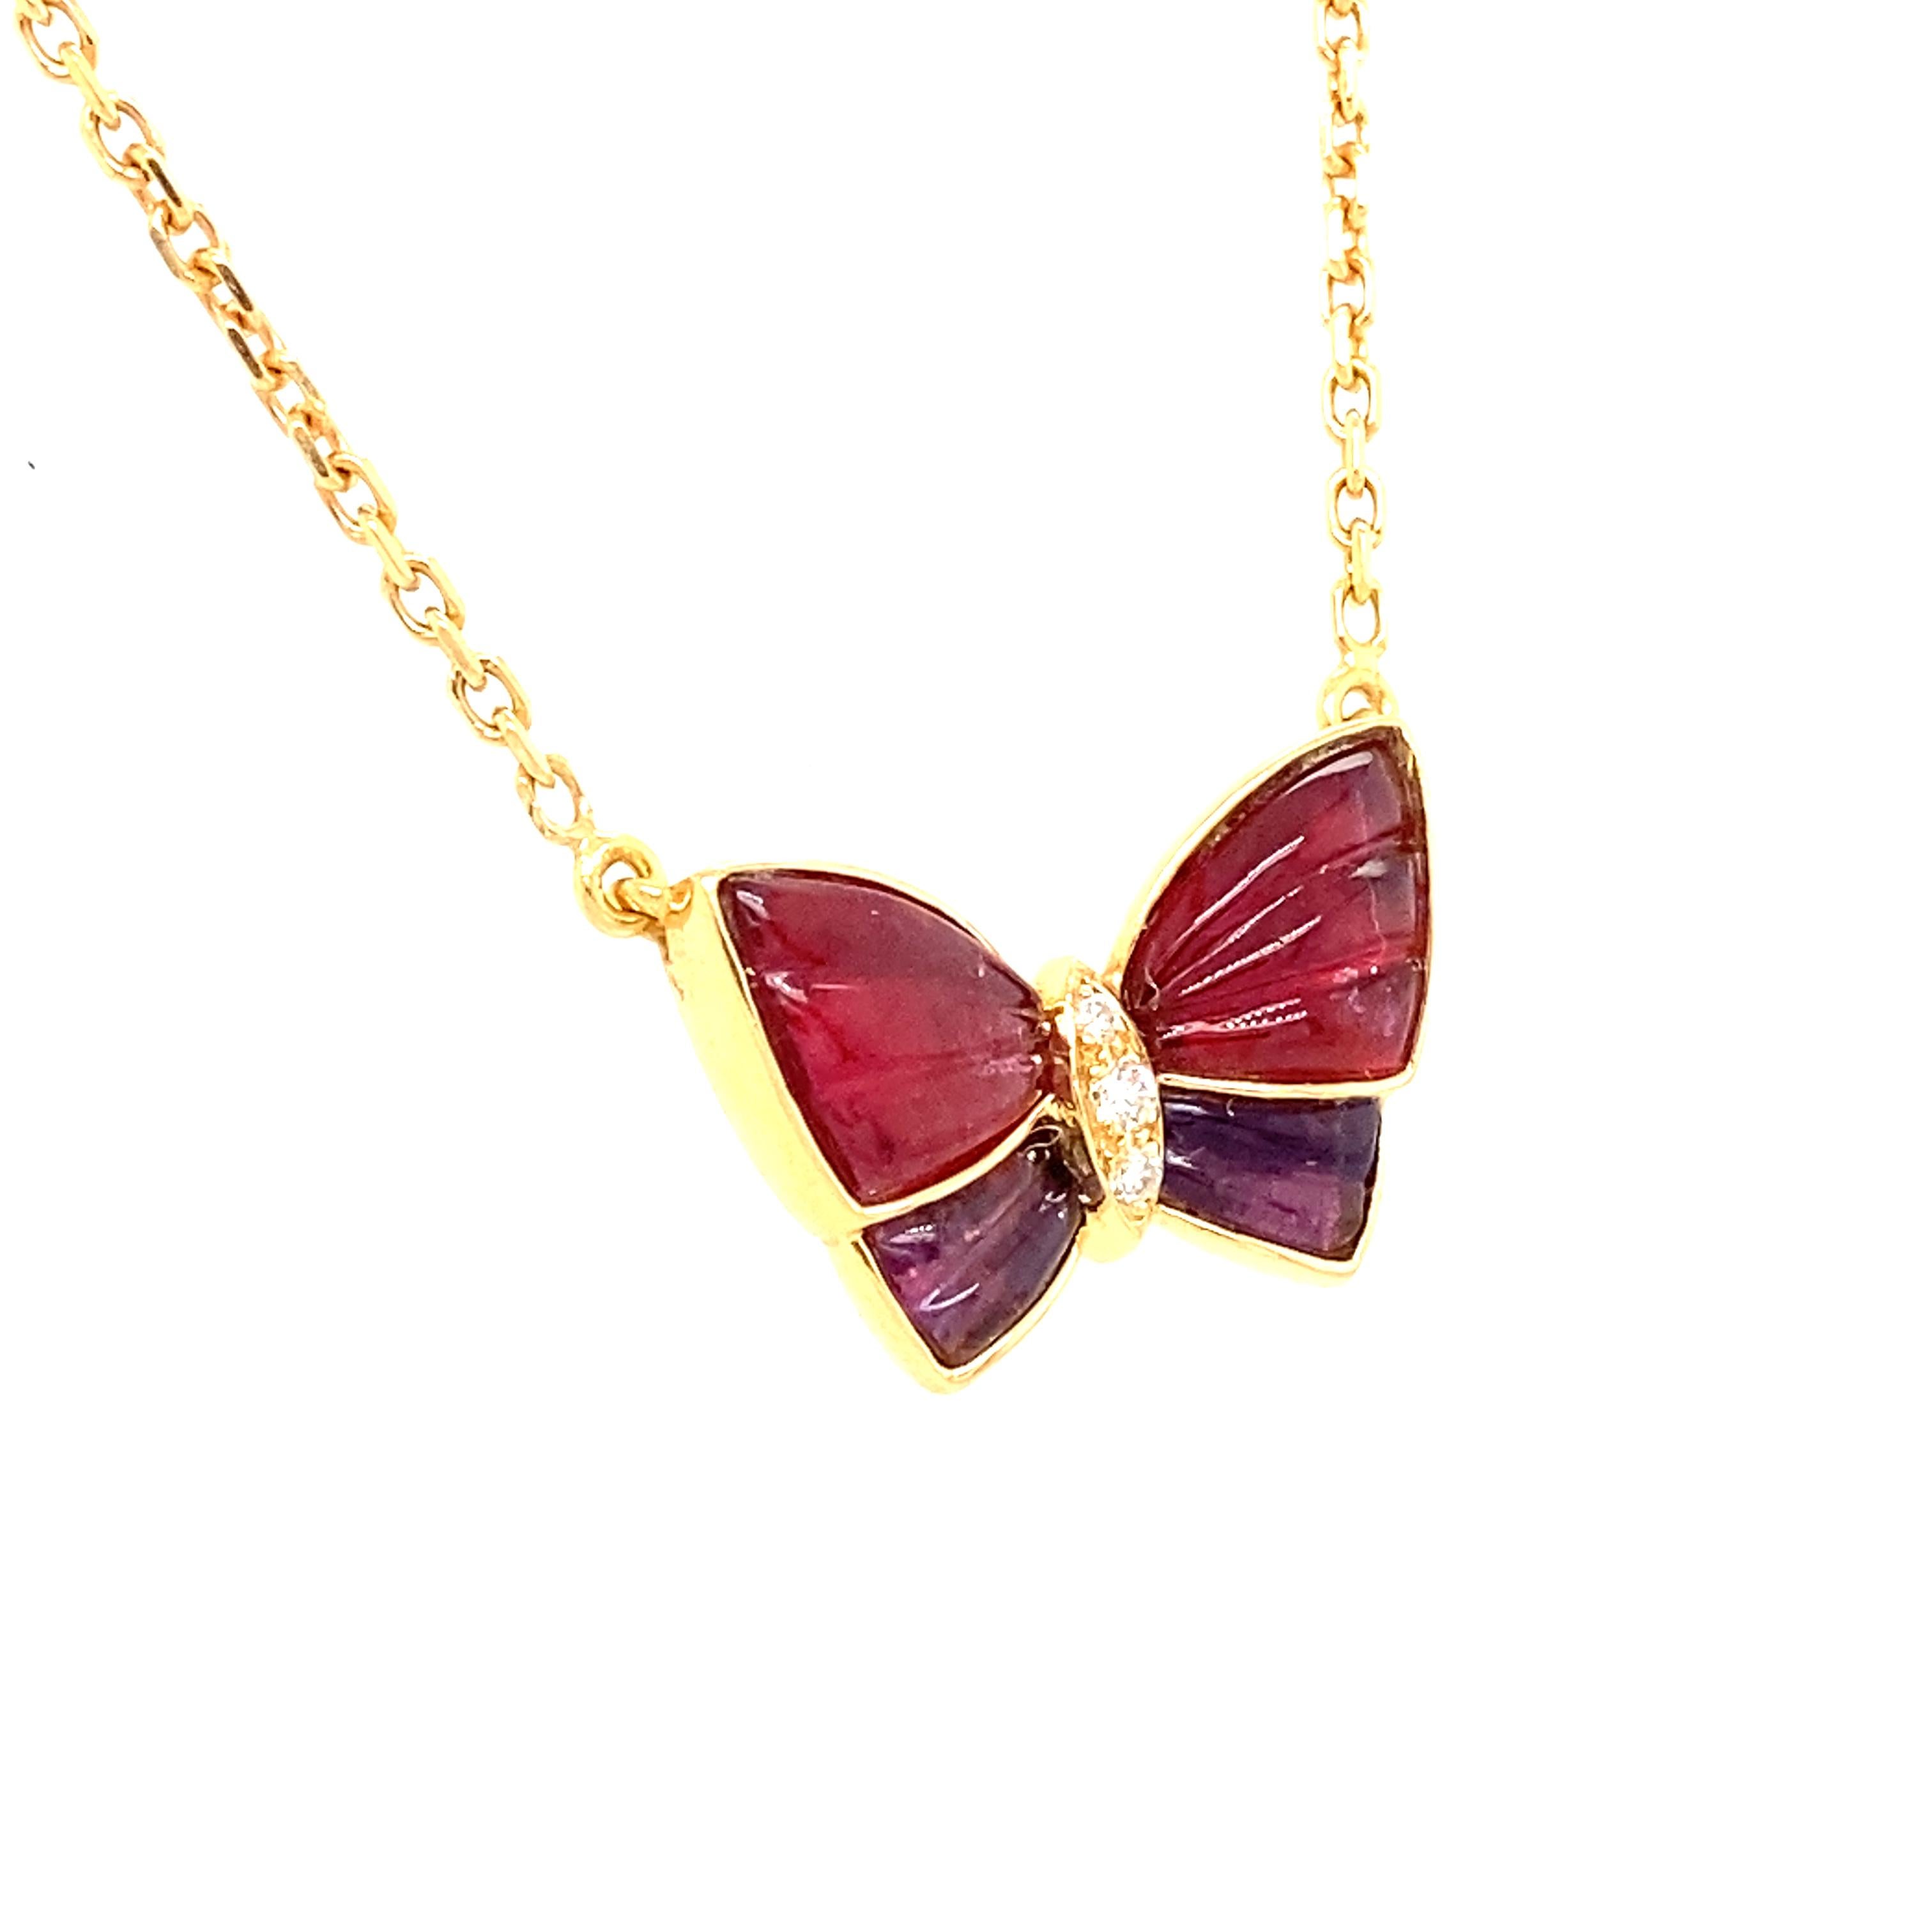 Van Cleef & Arpels Butterfly Gemset Pendant

A most charming 18k gold, diamond, red tourmaline and amethyst butterfly pendant by Van Cleef & Arpels with a beautiful choice of deep red and purple coloured gems for the wings of the butterfly. The body